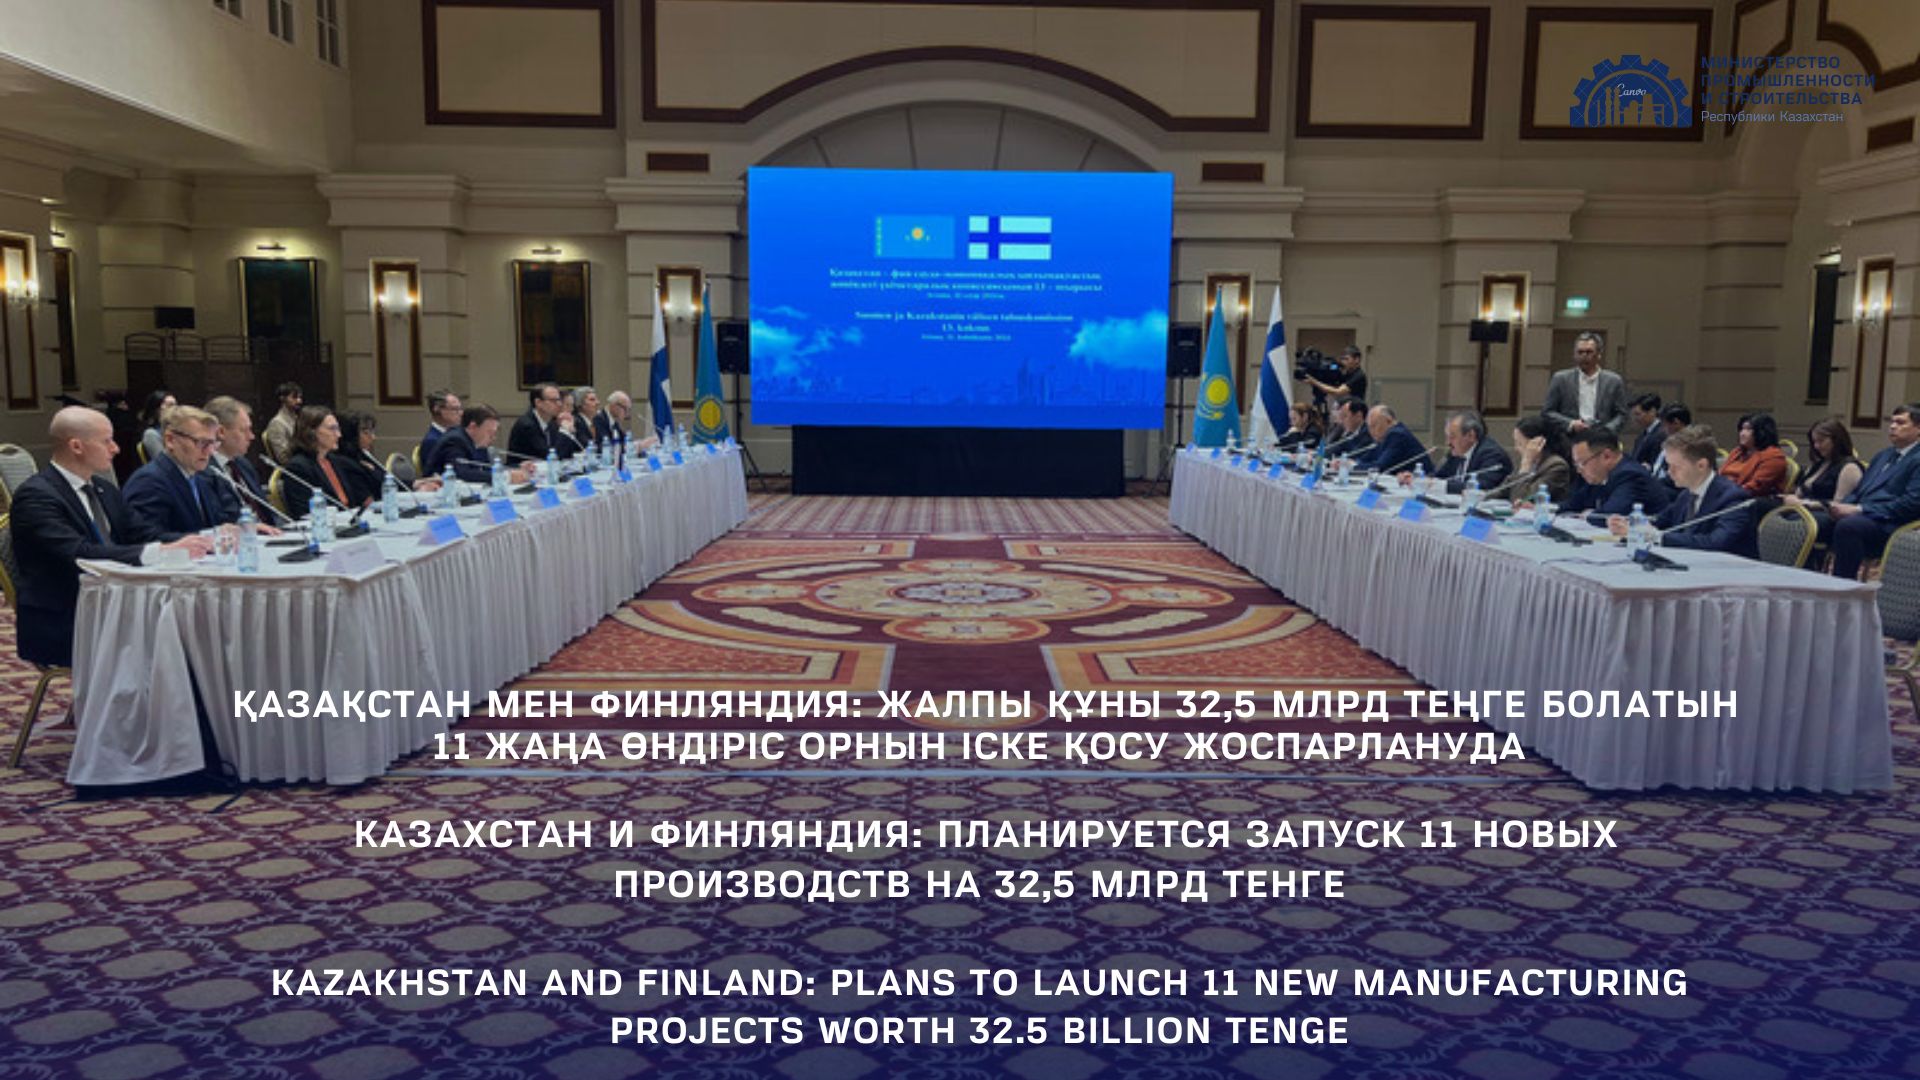 Kazakhstan and Finland: Plans to launch 11 new manufacturing projects worth 32.5 billion tenge